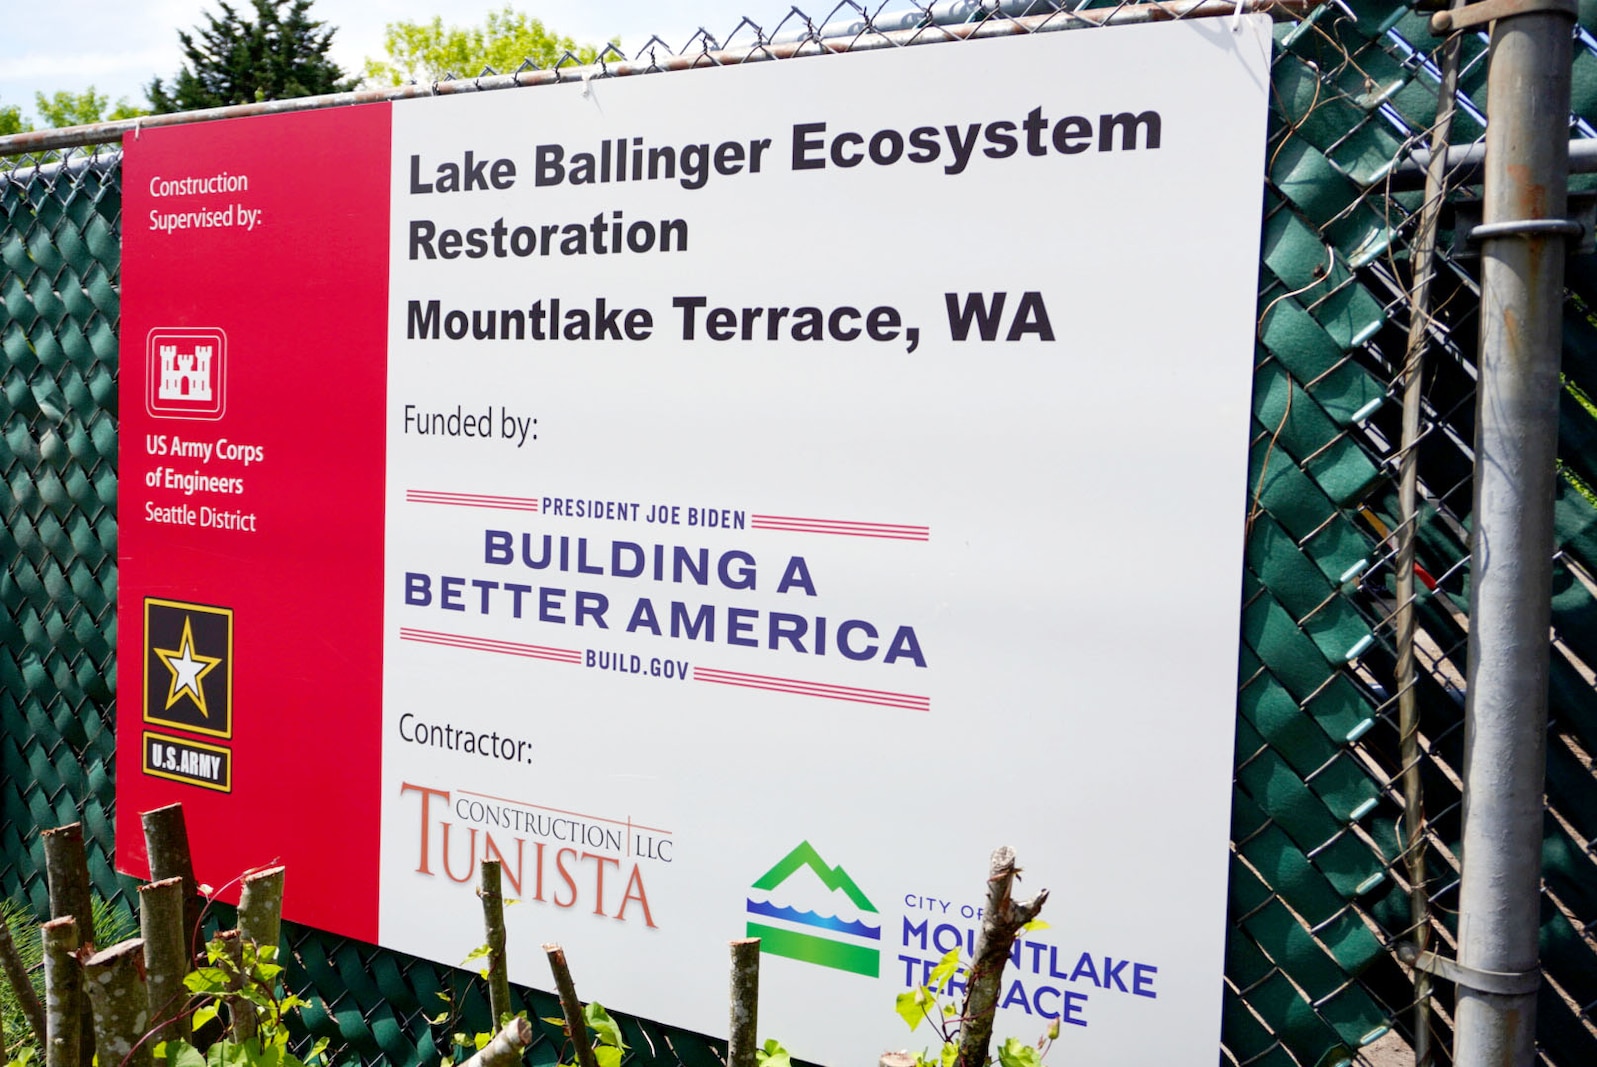 Photo of the U.S. Army Corps of Engineers official signage highlighting the Lake Ballinger Ecosystem Restoration Project at Ballinger Park, Mountlake Terrace, Washington